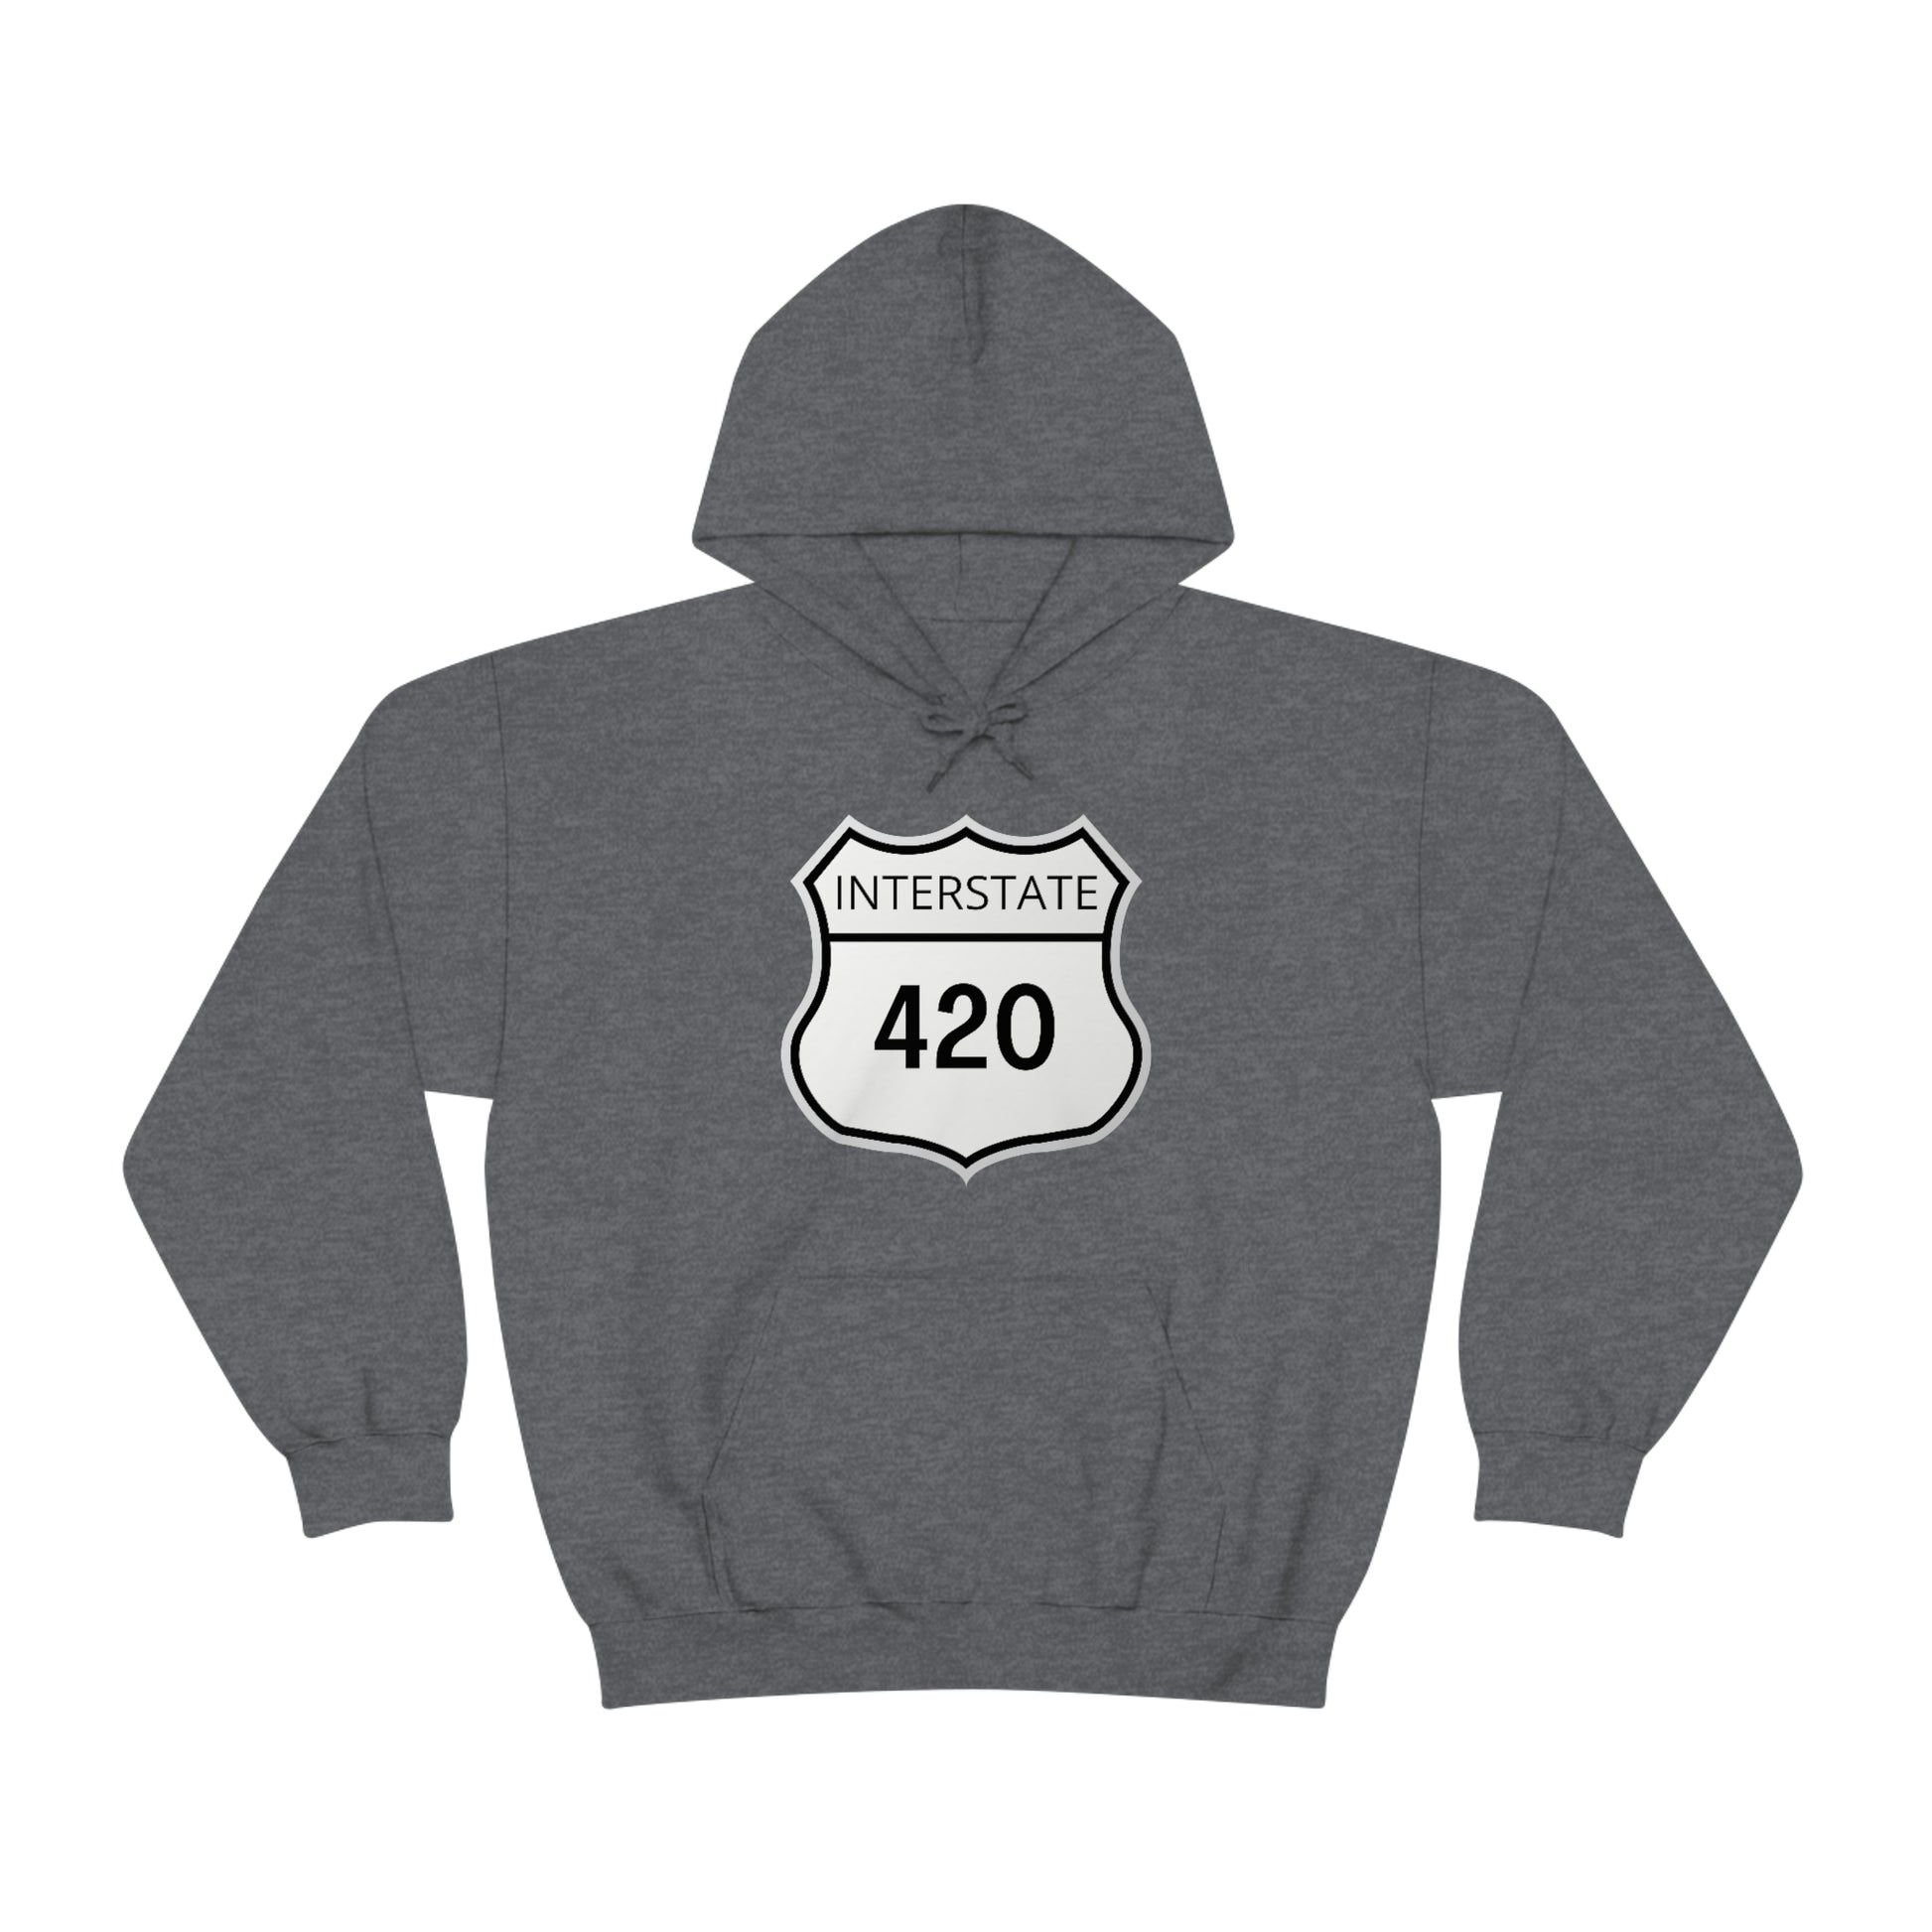 A charcoal gray, Interstate 420 weed hoodie